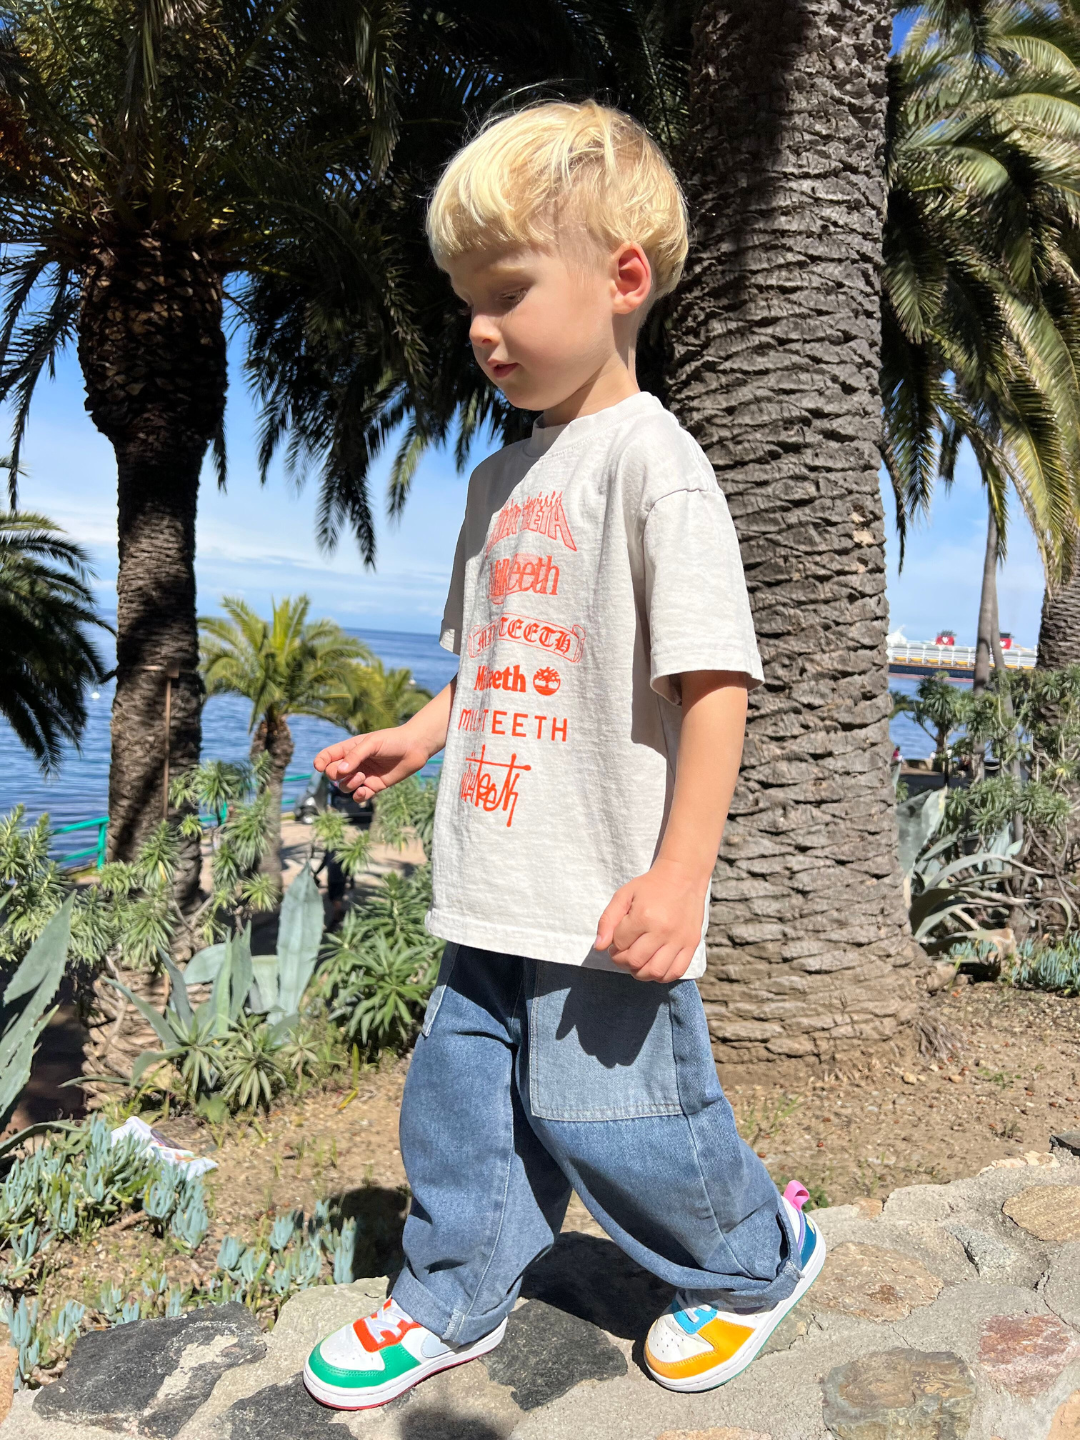 A child wearing the double trouble kids jeans in medium blue denim with lighter blue patch pockets. They have short blond hair, and are wearing a light grey tshirt with orange Milk teeth lettering, and white sneakers with colorful trim, walking on a stone wall with palm trees, the ocean and blue sky in the background.